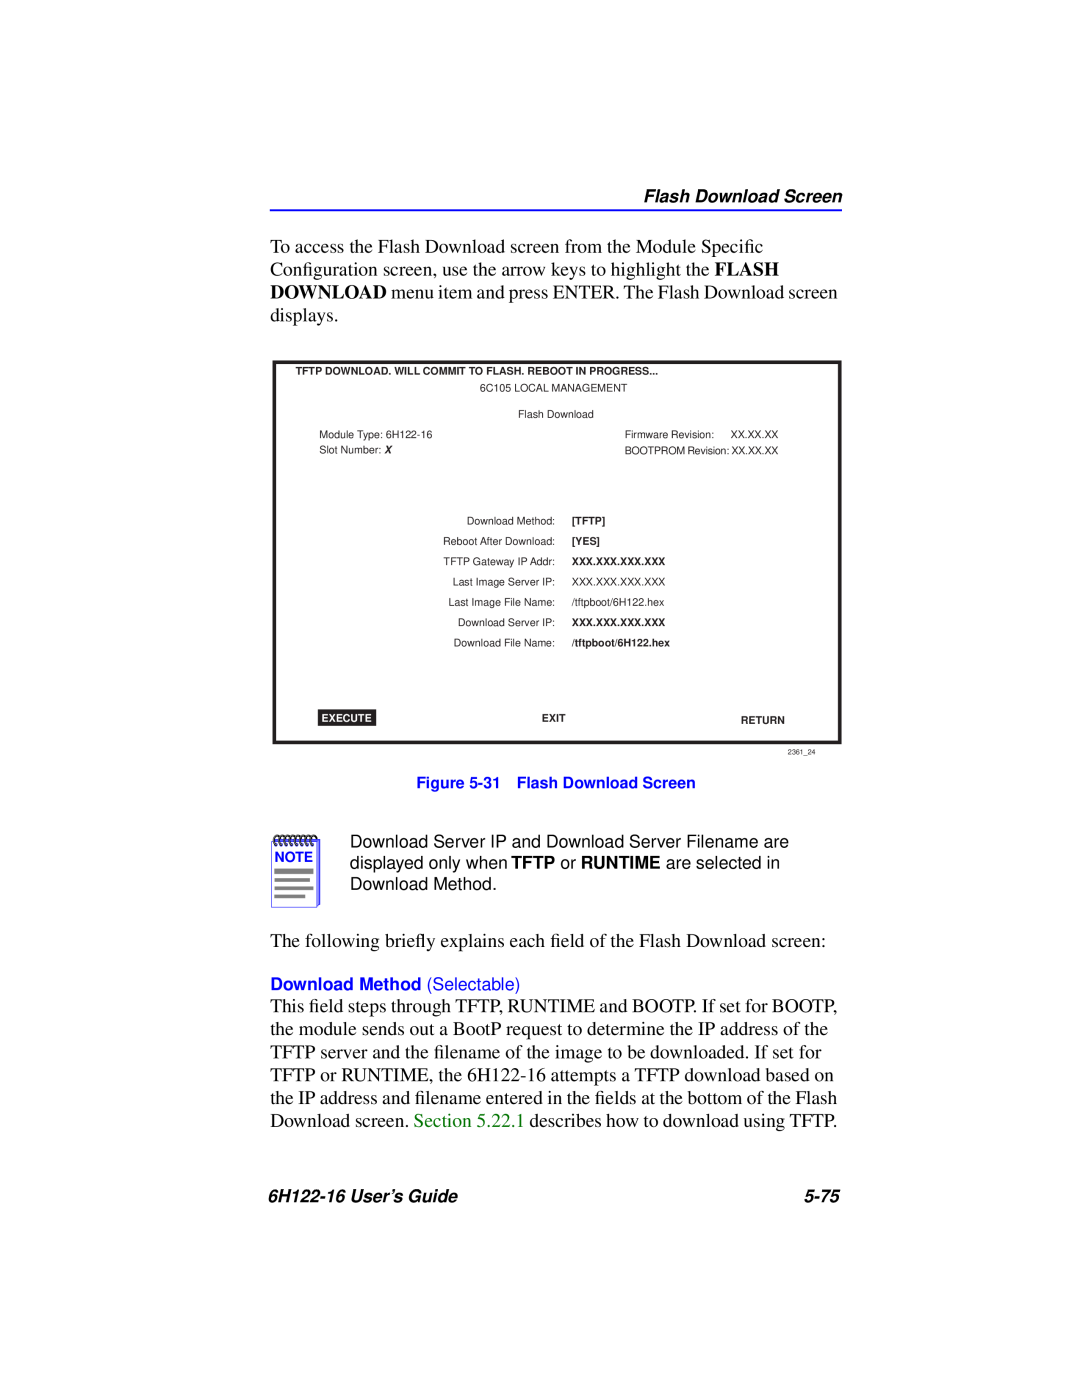 Cabletron Systems 6H122-16 manual The following brieﬂy explains each ﬁeld of the Flash Download screen 